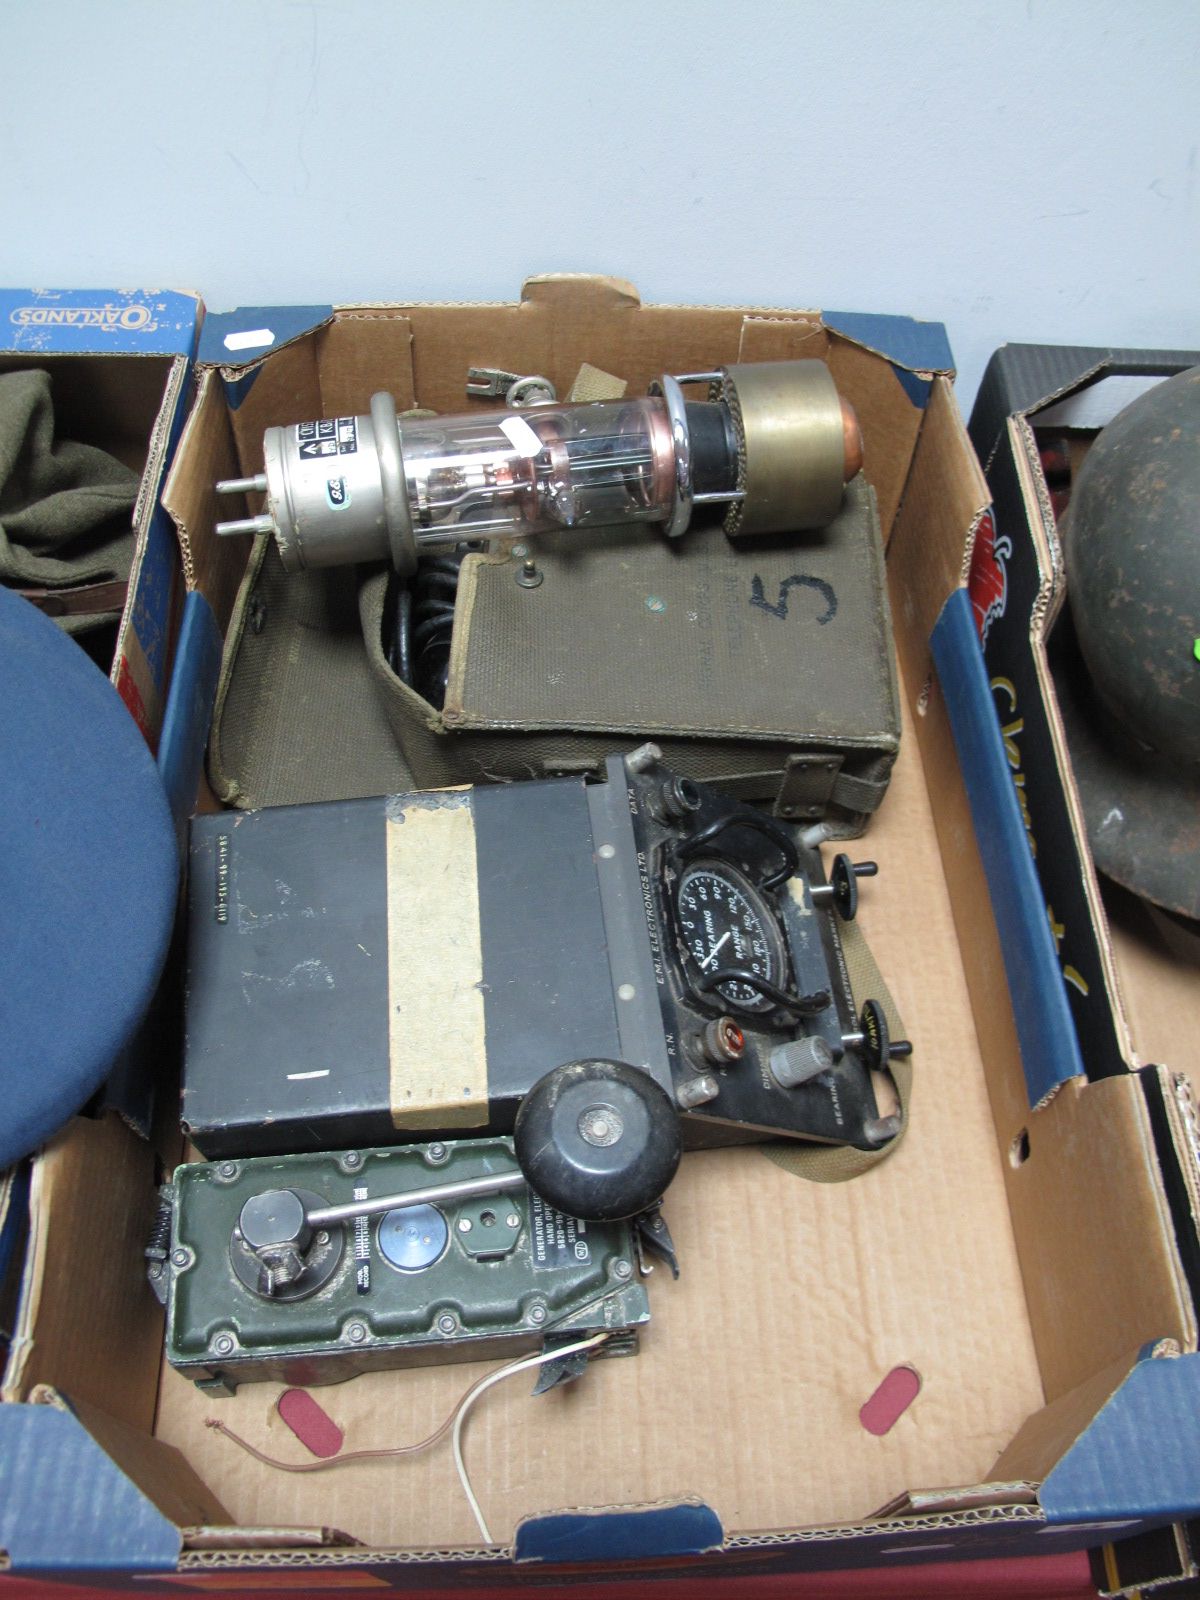 A Mid XX Century British Military Range Finder, a hand held generator and GEC military valve and